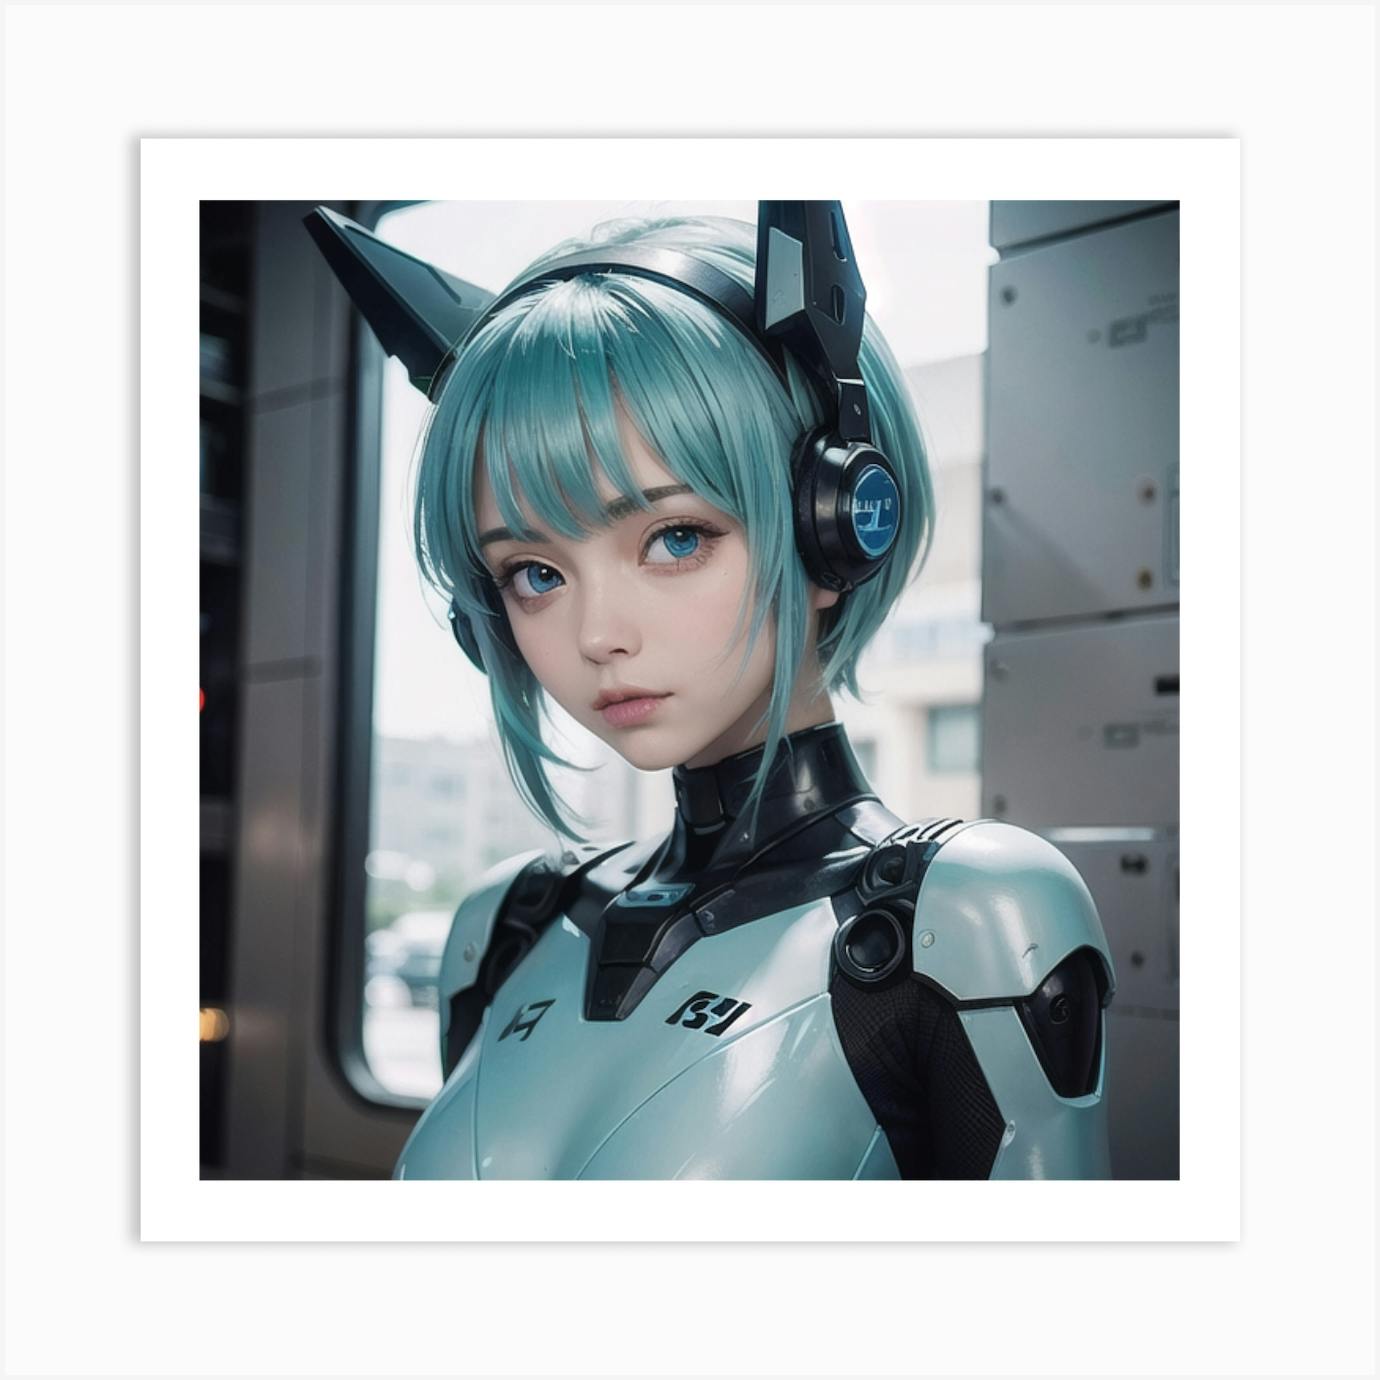 anthony paulette recommends sexy anime robot girl pic